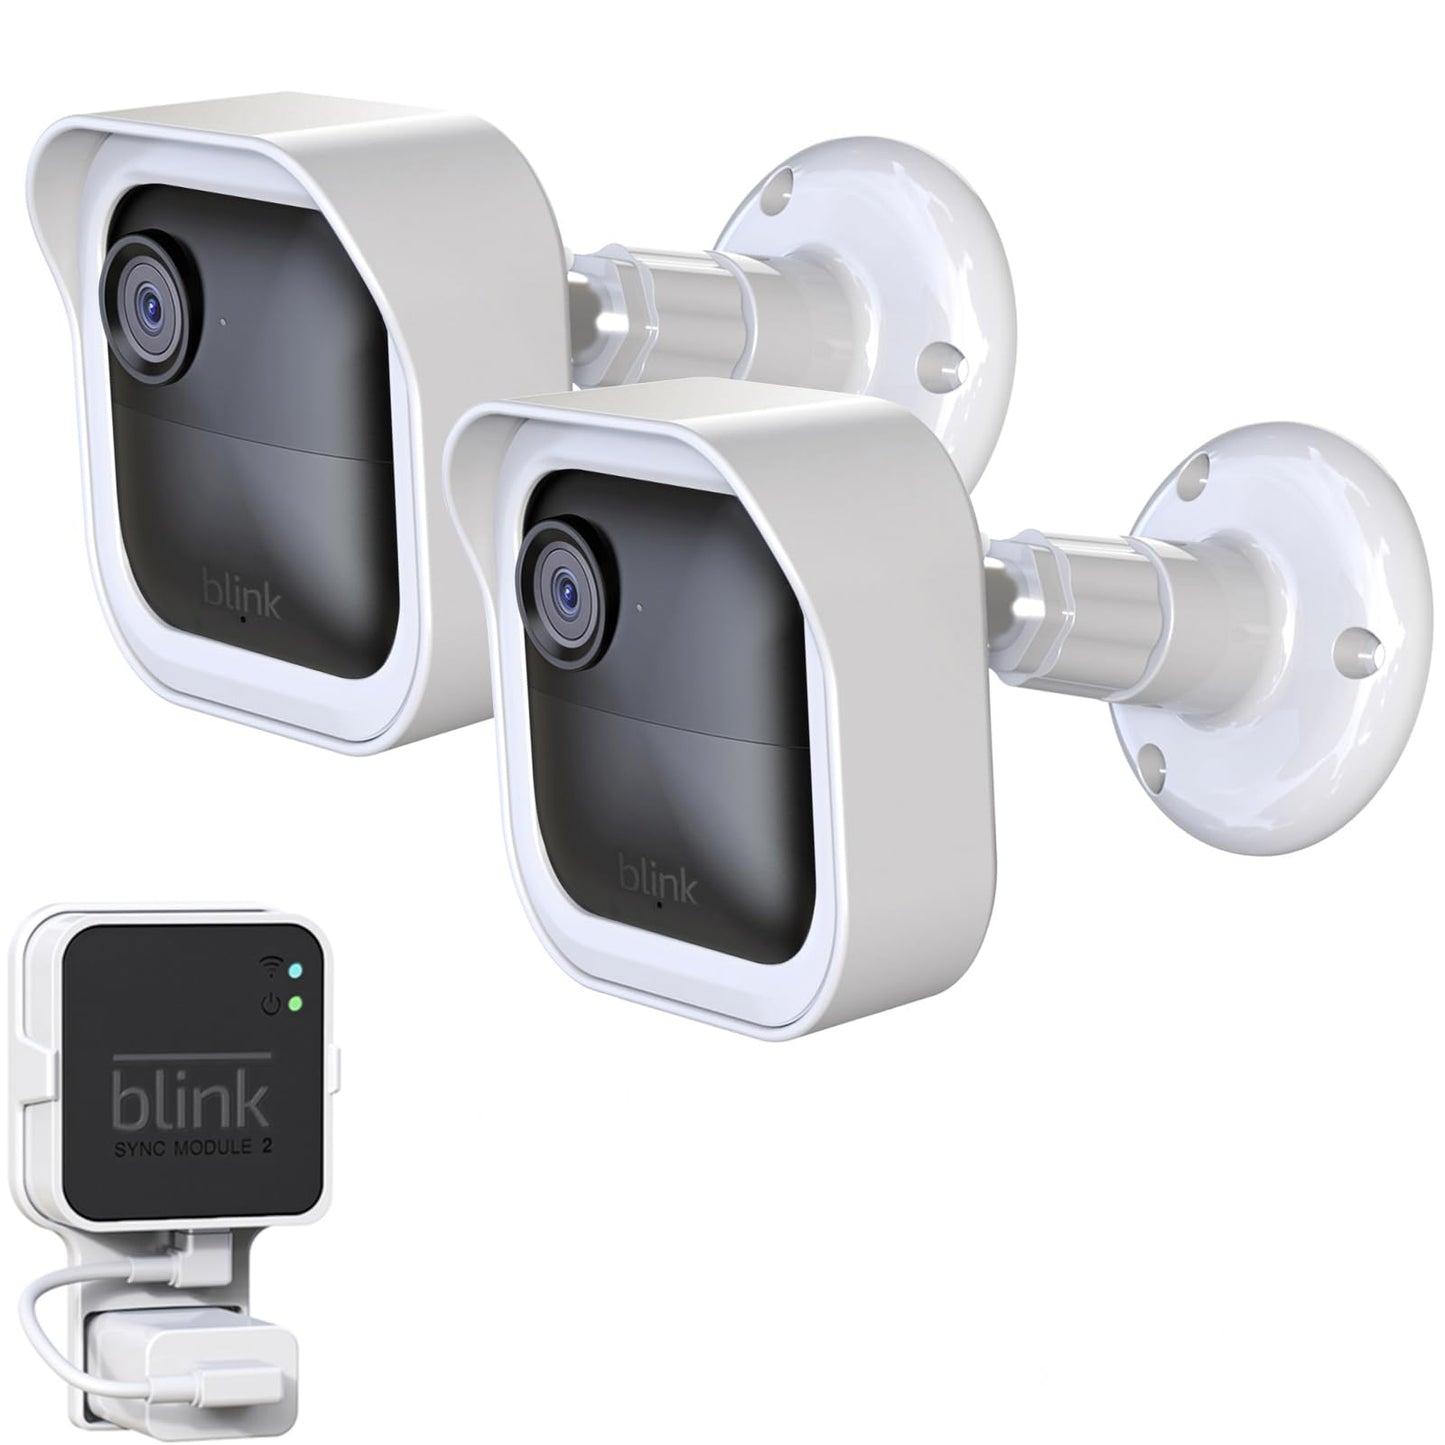 Blink Outdoor 4 (4th Gen) Camera Mount, Weatherproof Protective Housing and 360° Adjustable Mount with Sync Module 2 Mount for Blink Outdoor Security Camera System (White, 2 Pack)